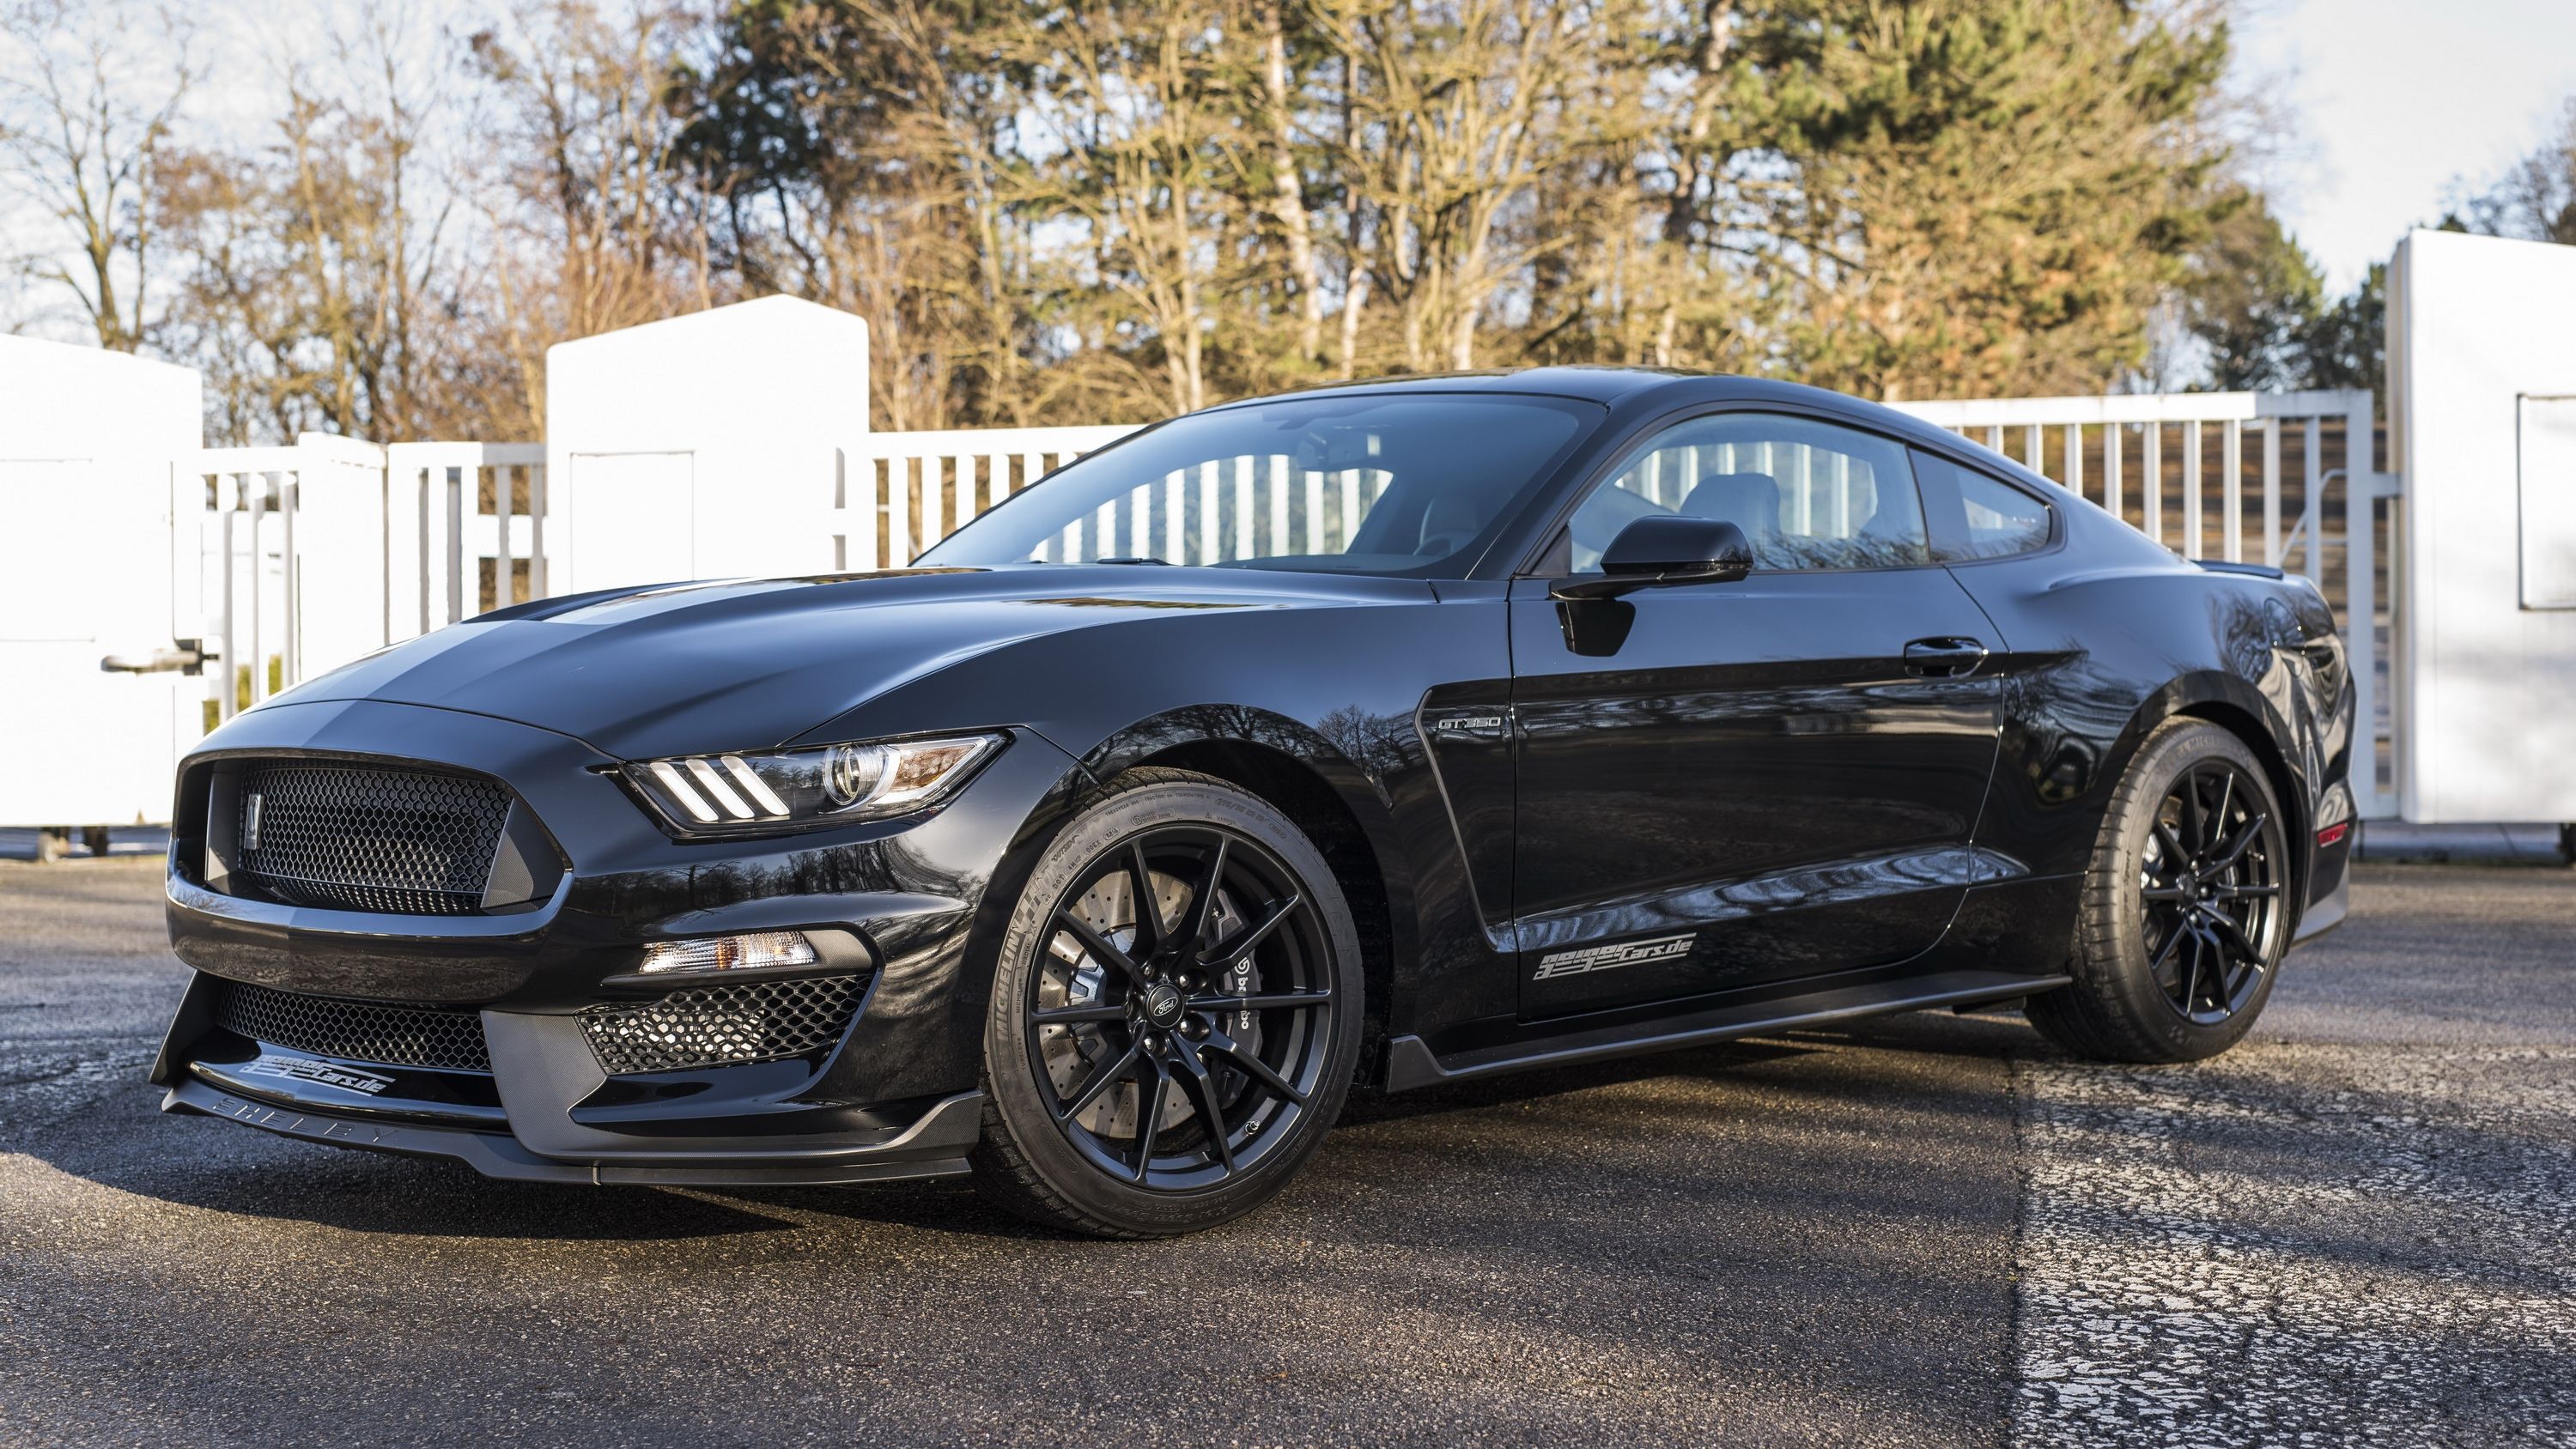 2016 GeigerCars To Sell 2016 Ford Shelby GT350 Mustang In Europe